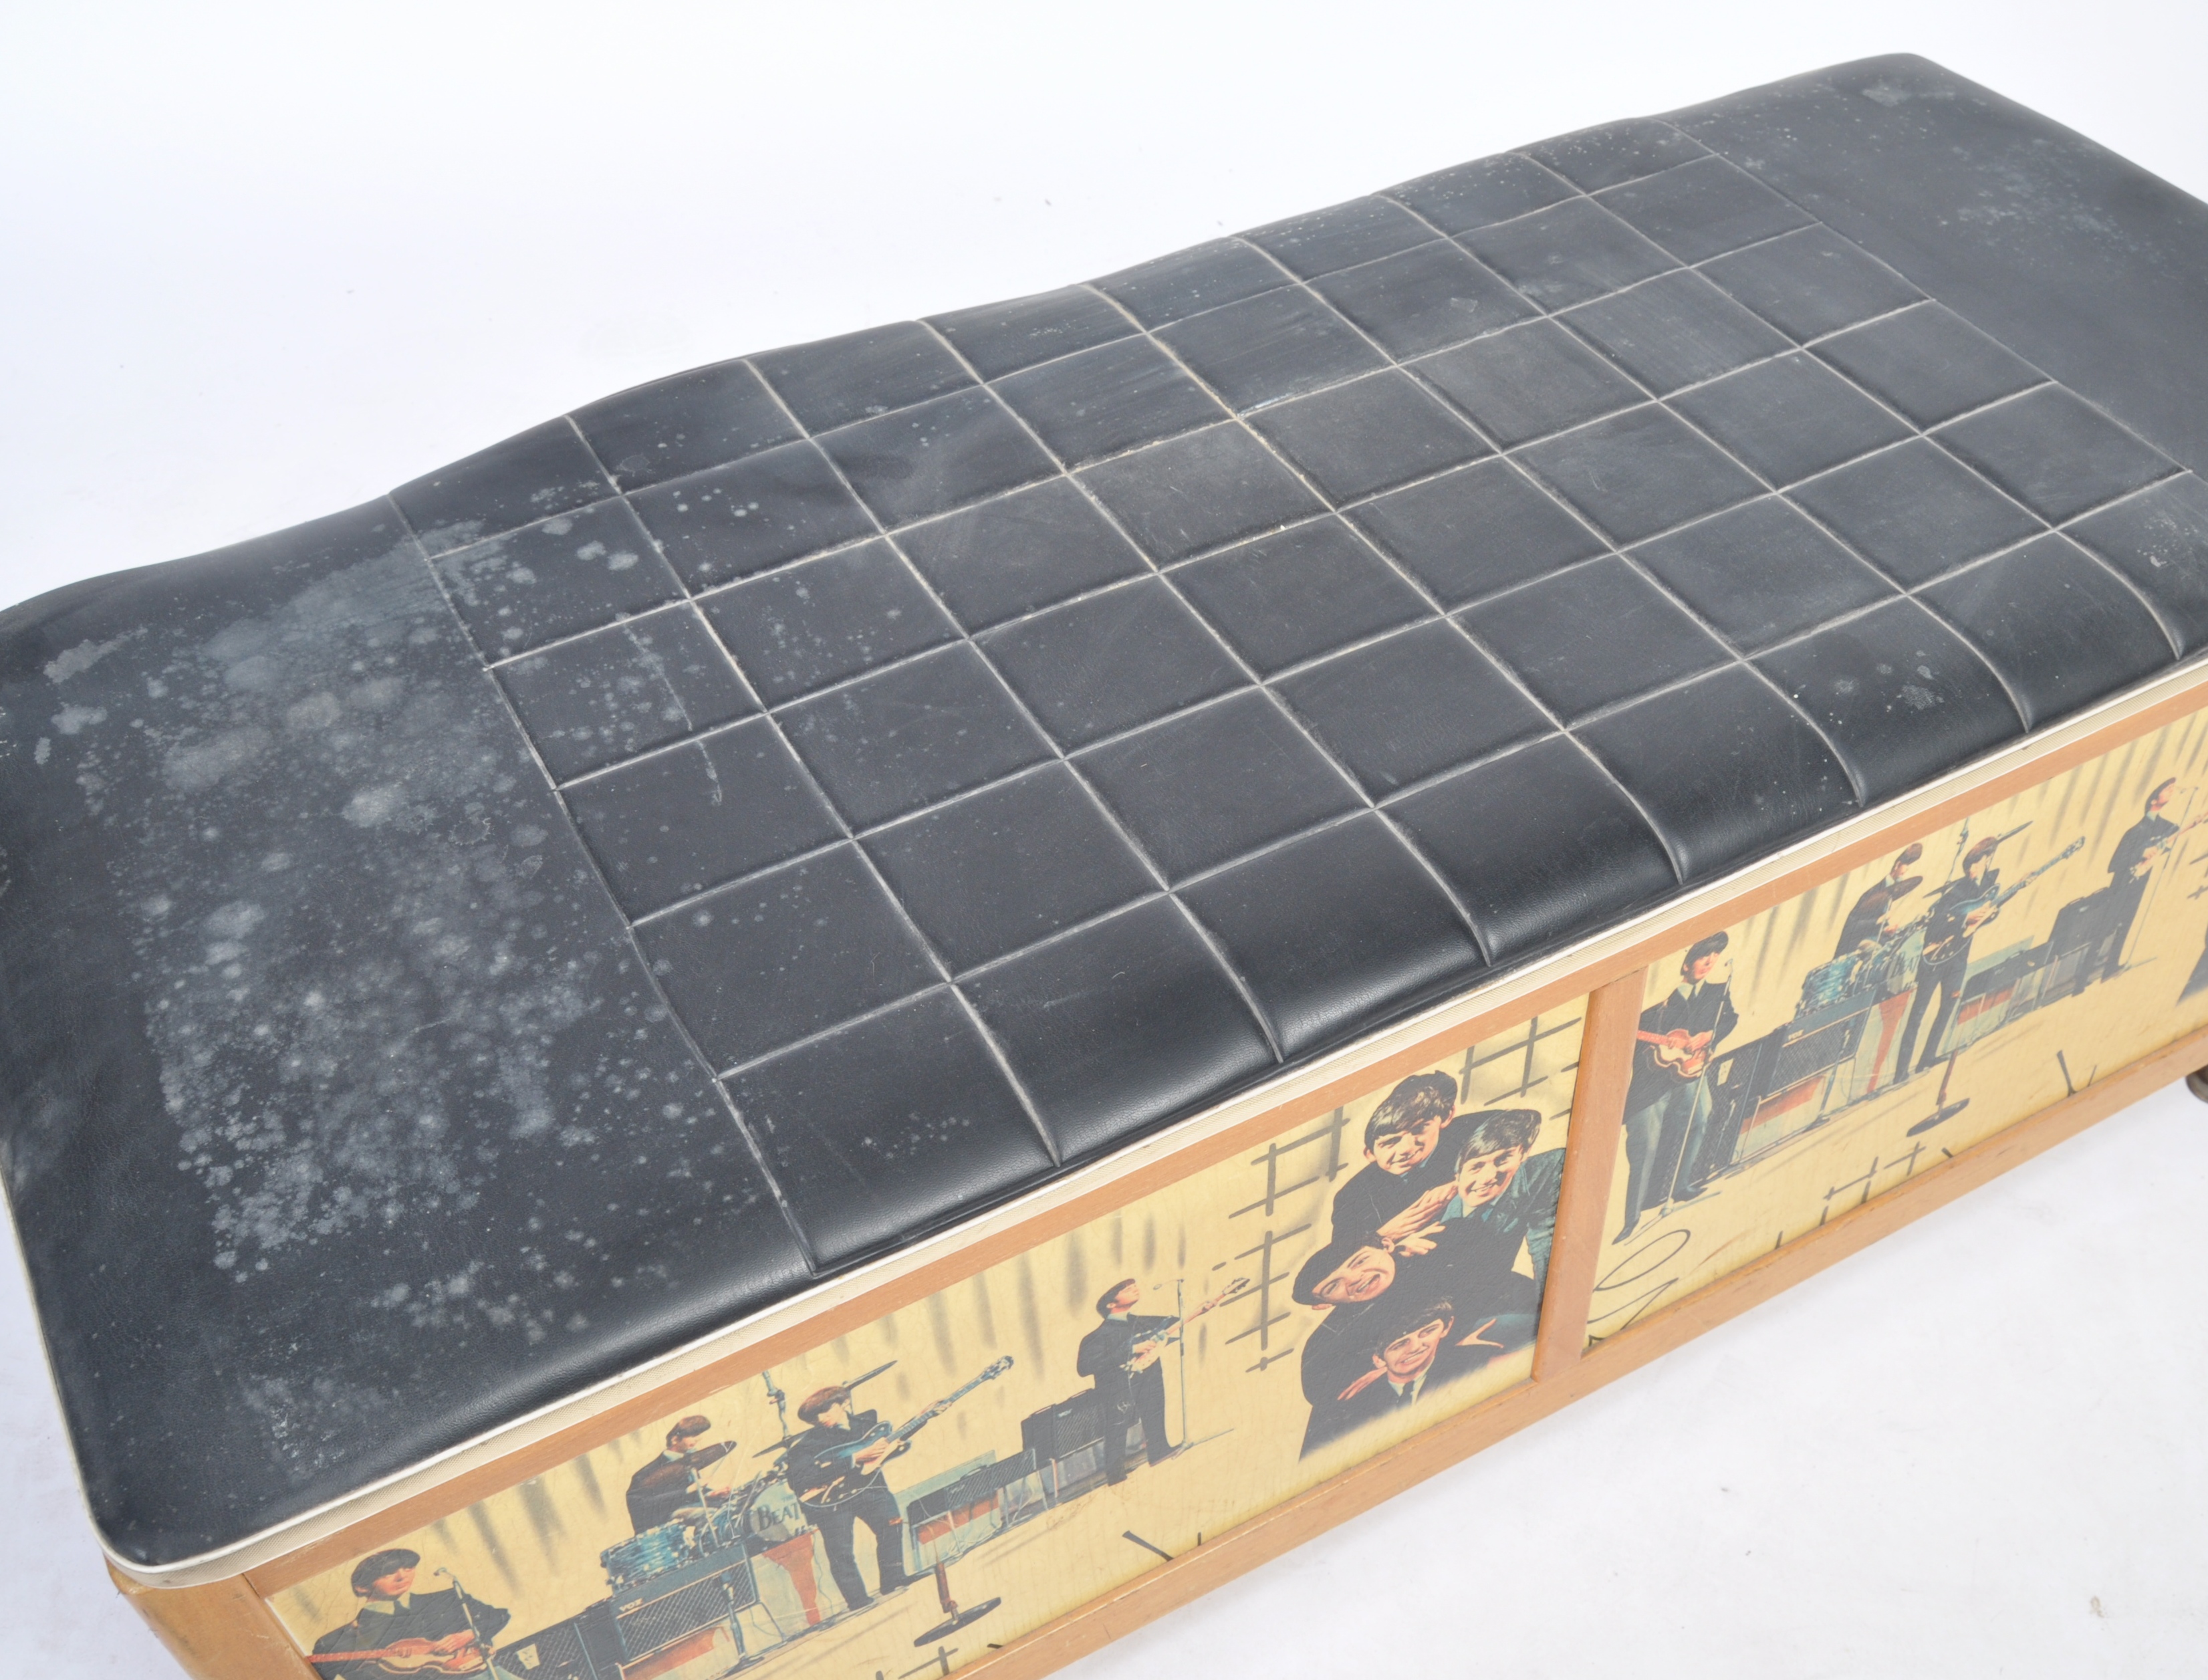 RARE 1960'S BEATLES OTTOMAN / BLANKET BOX BY AVALO - Image 7 of 8